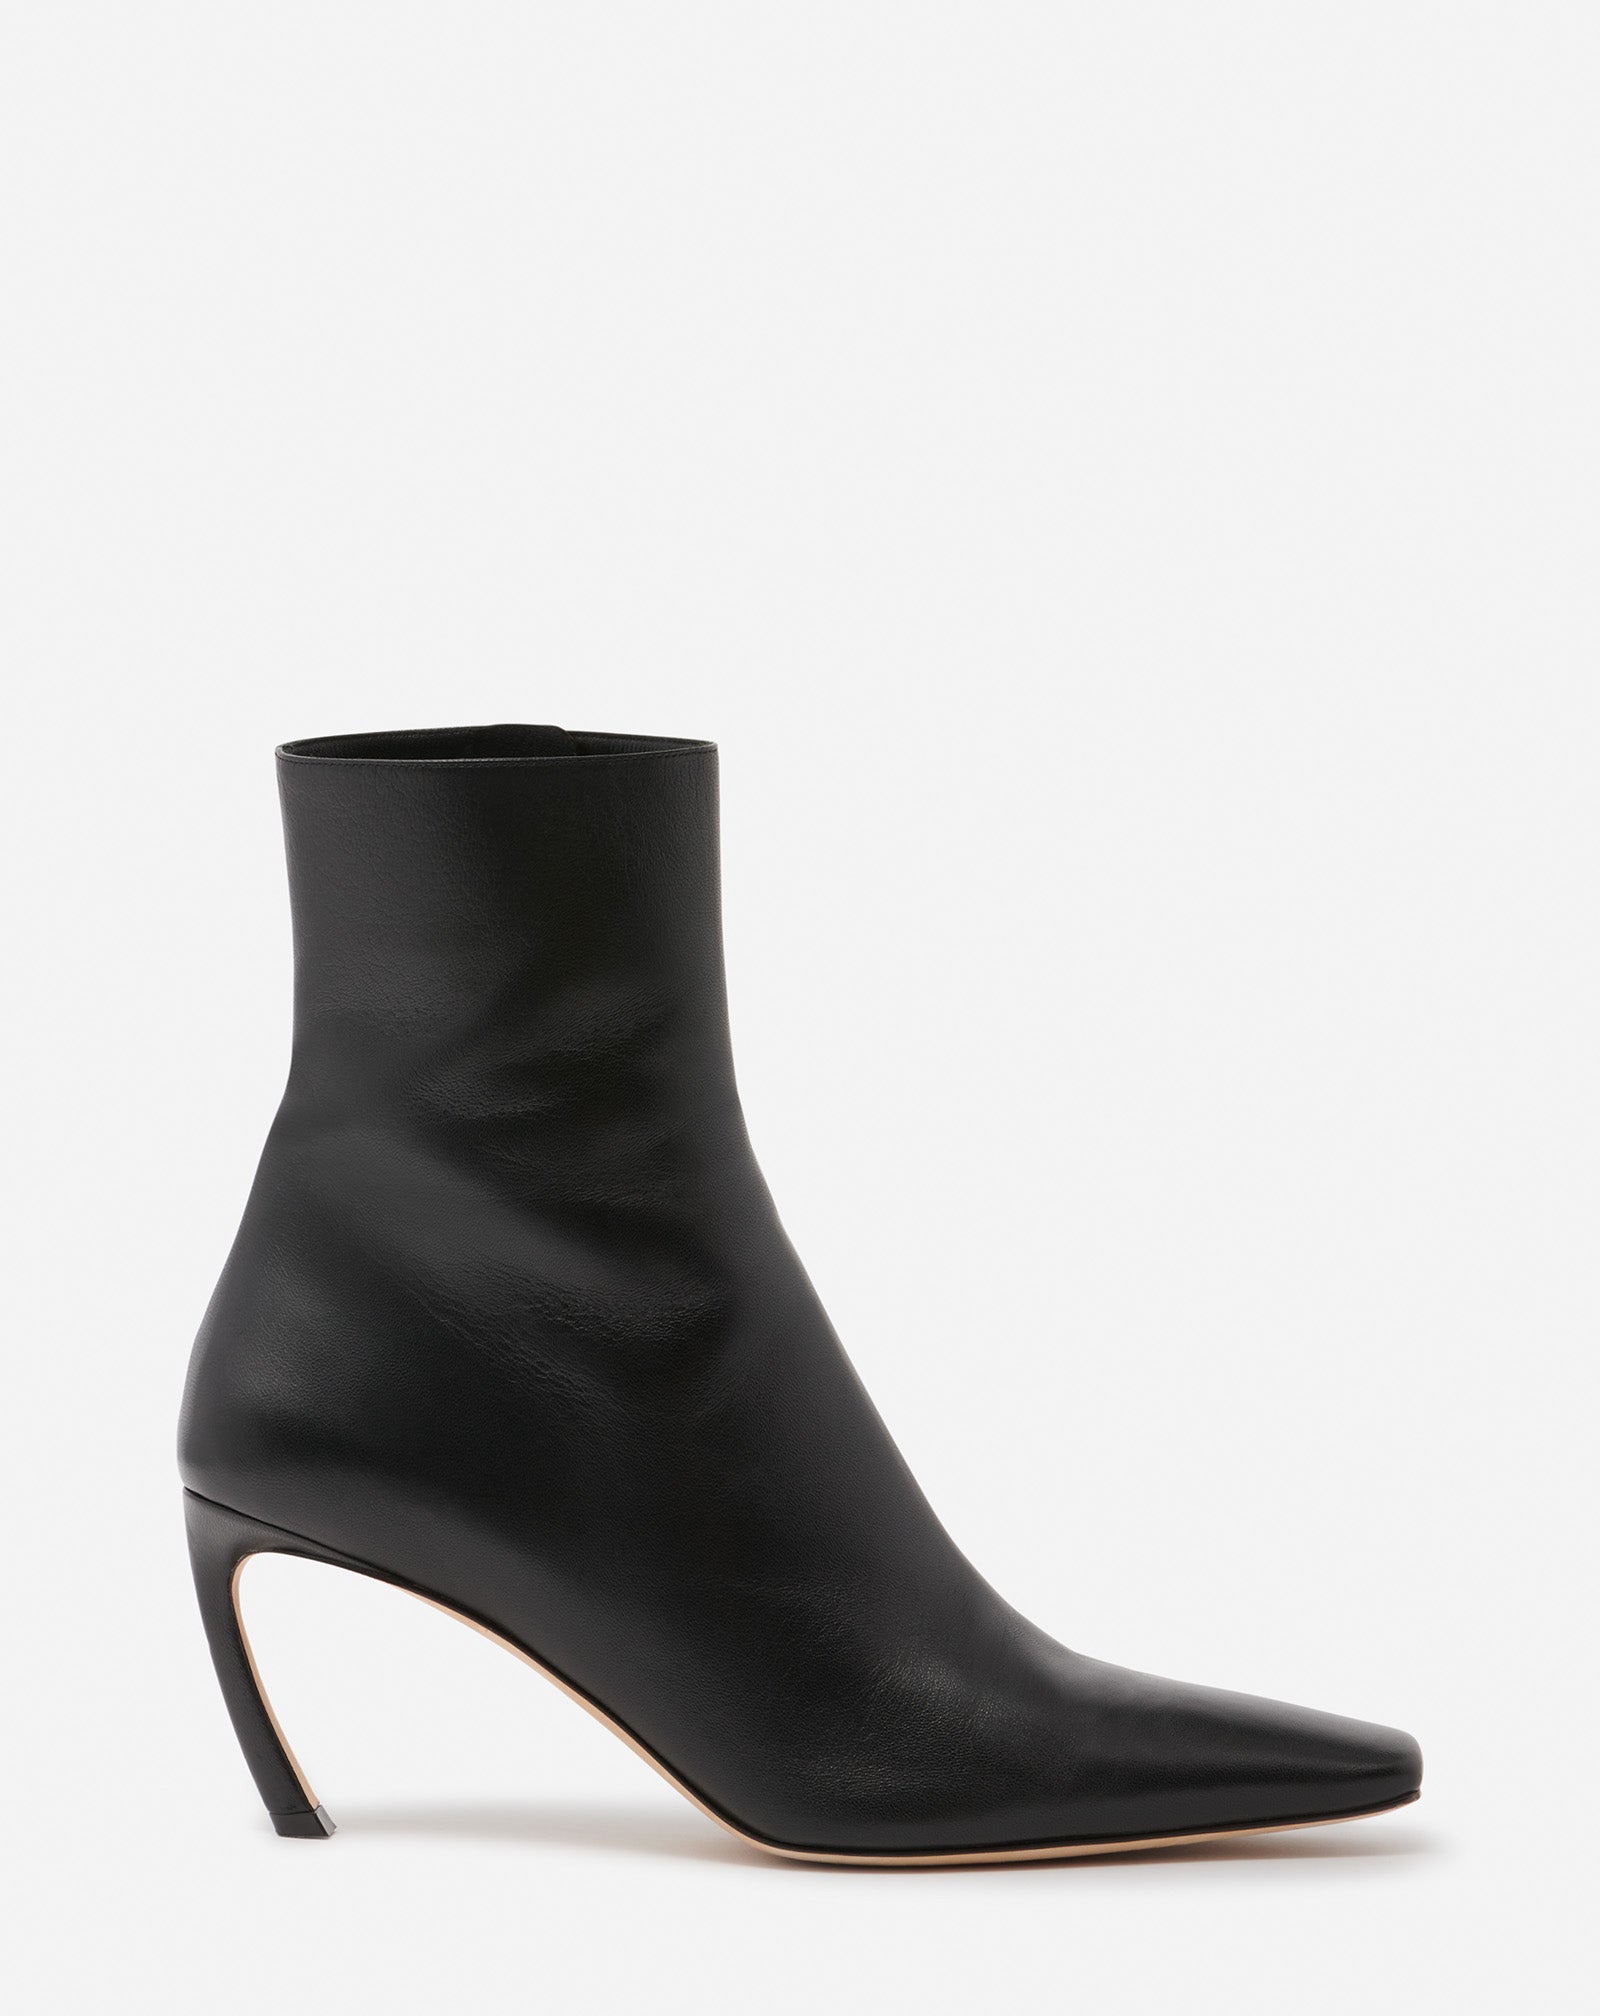 LEATHER SWING BOOTS, BLACK